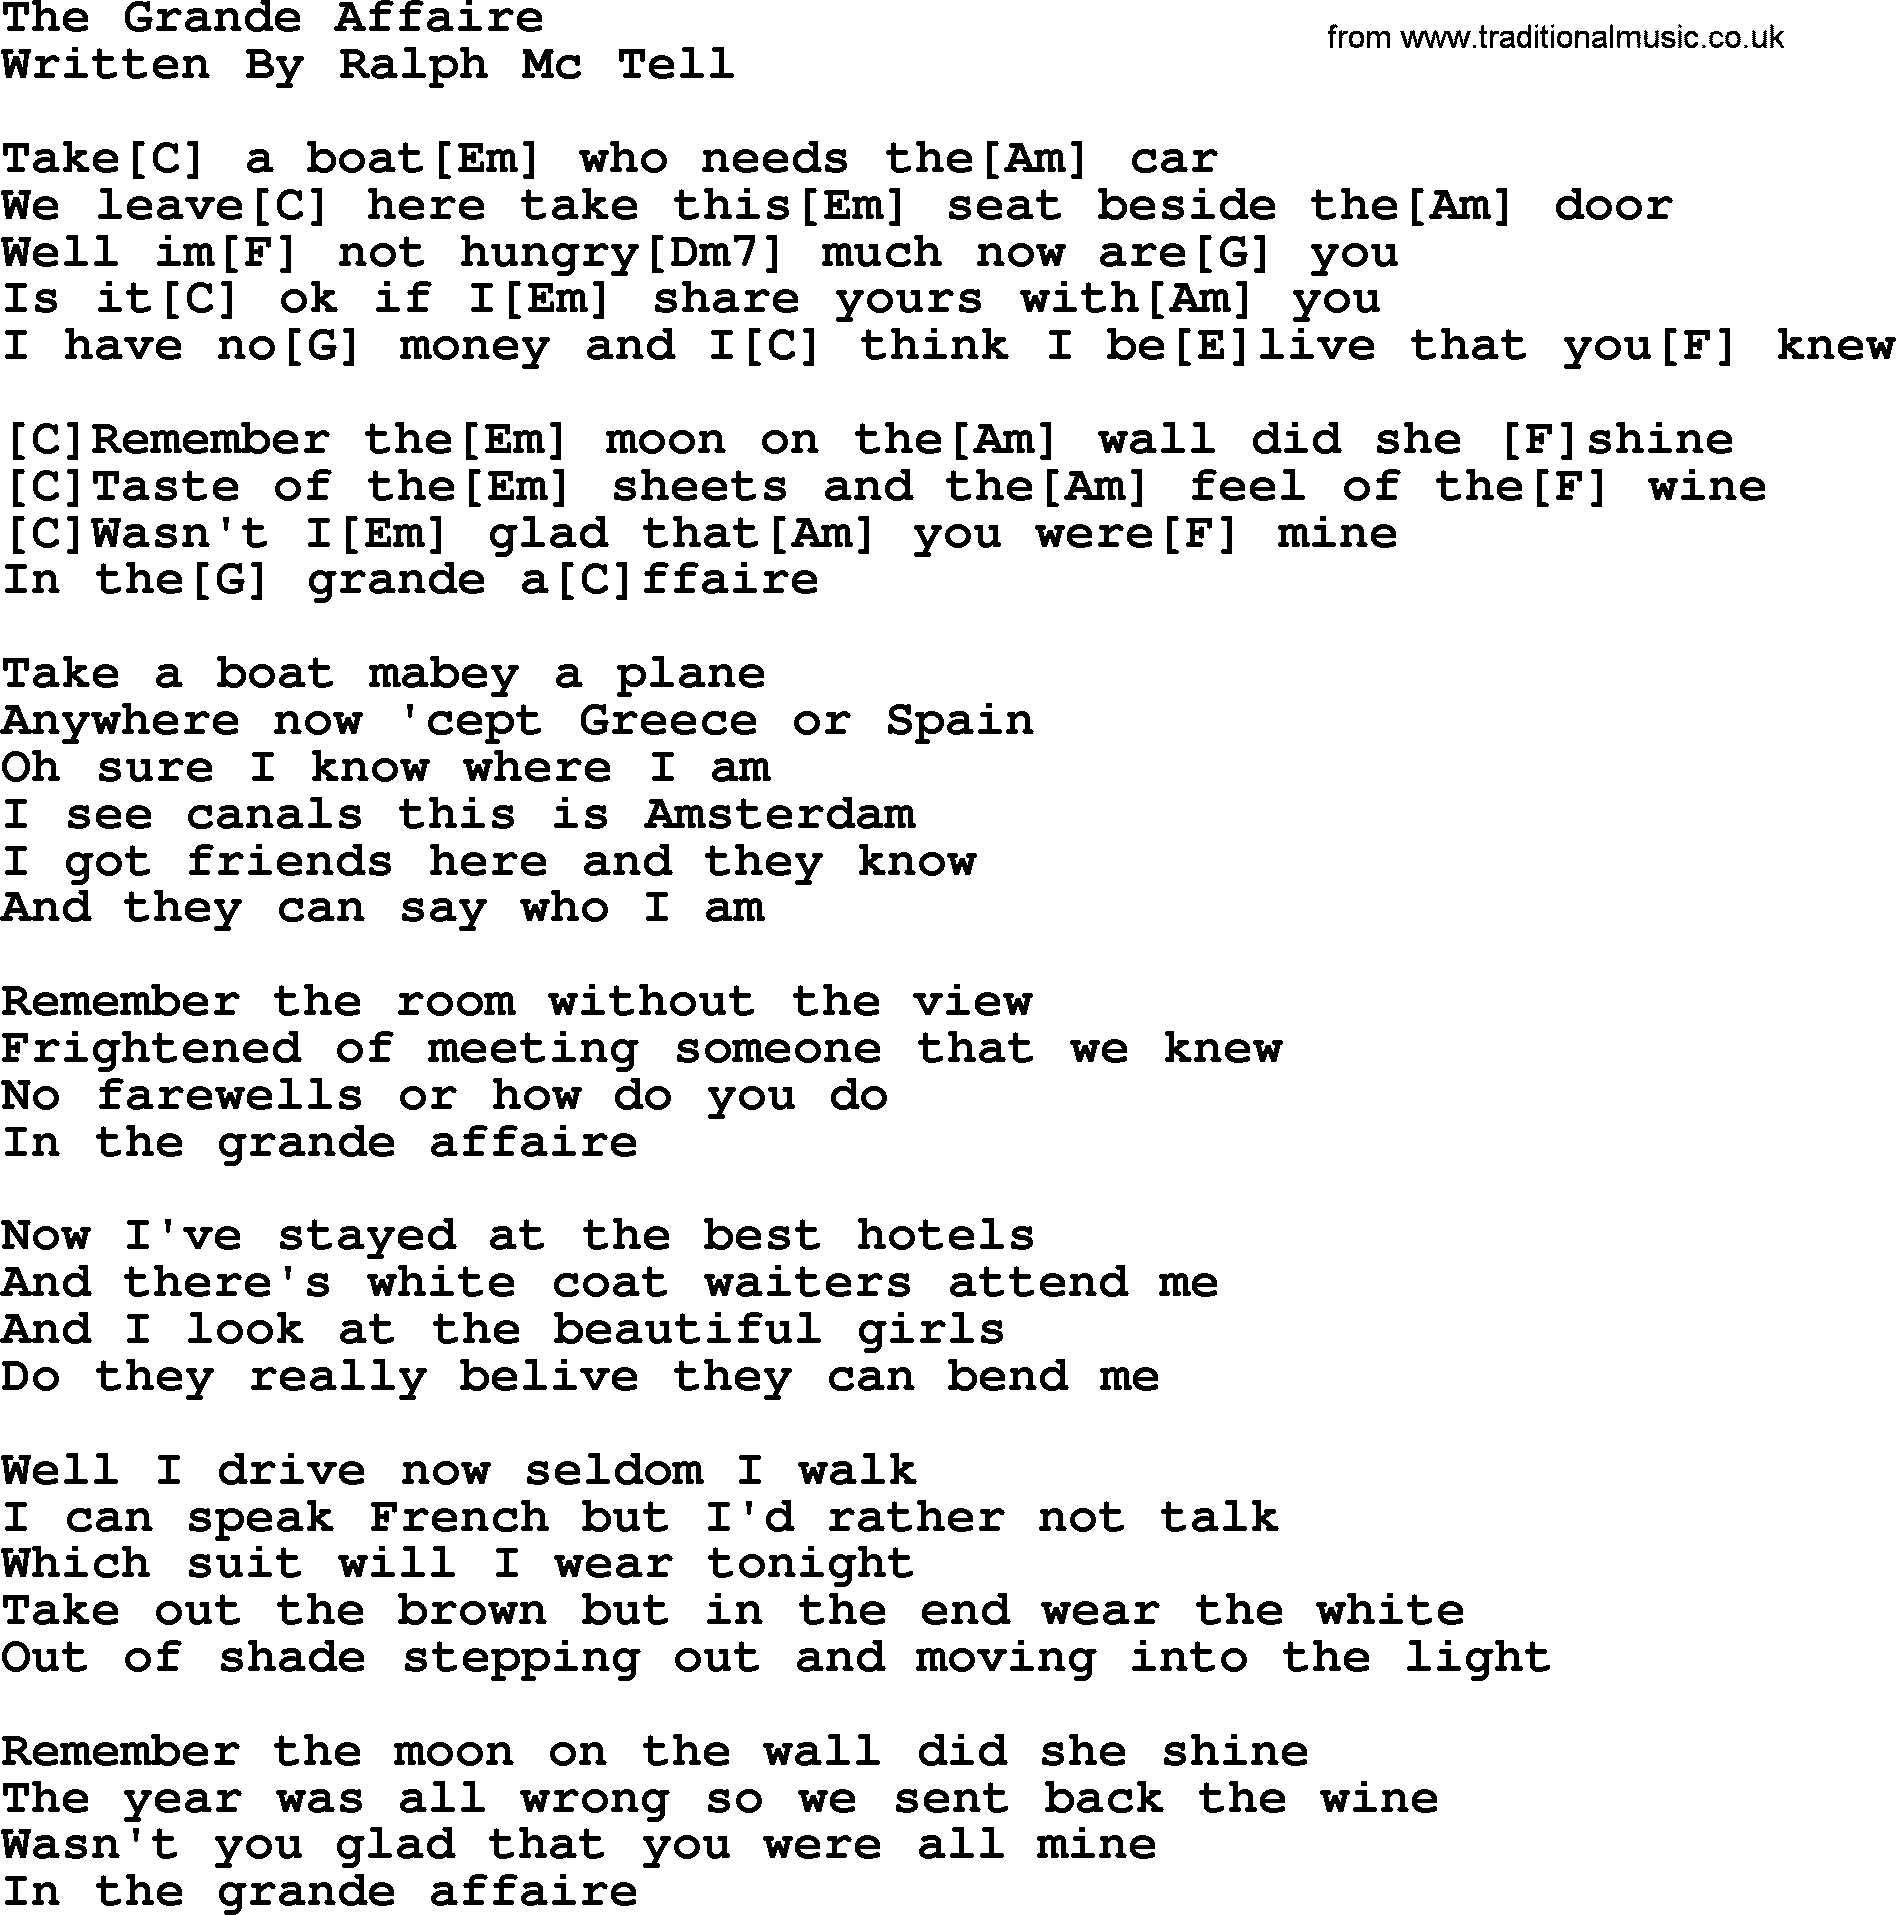 Ralph McTell Song: The Grande Affaire, lyrics and chords